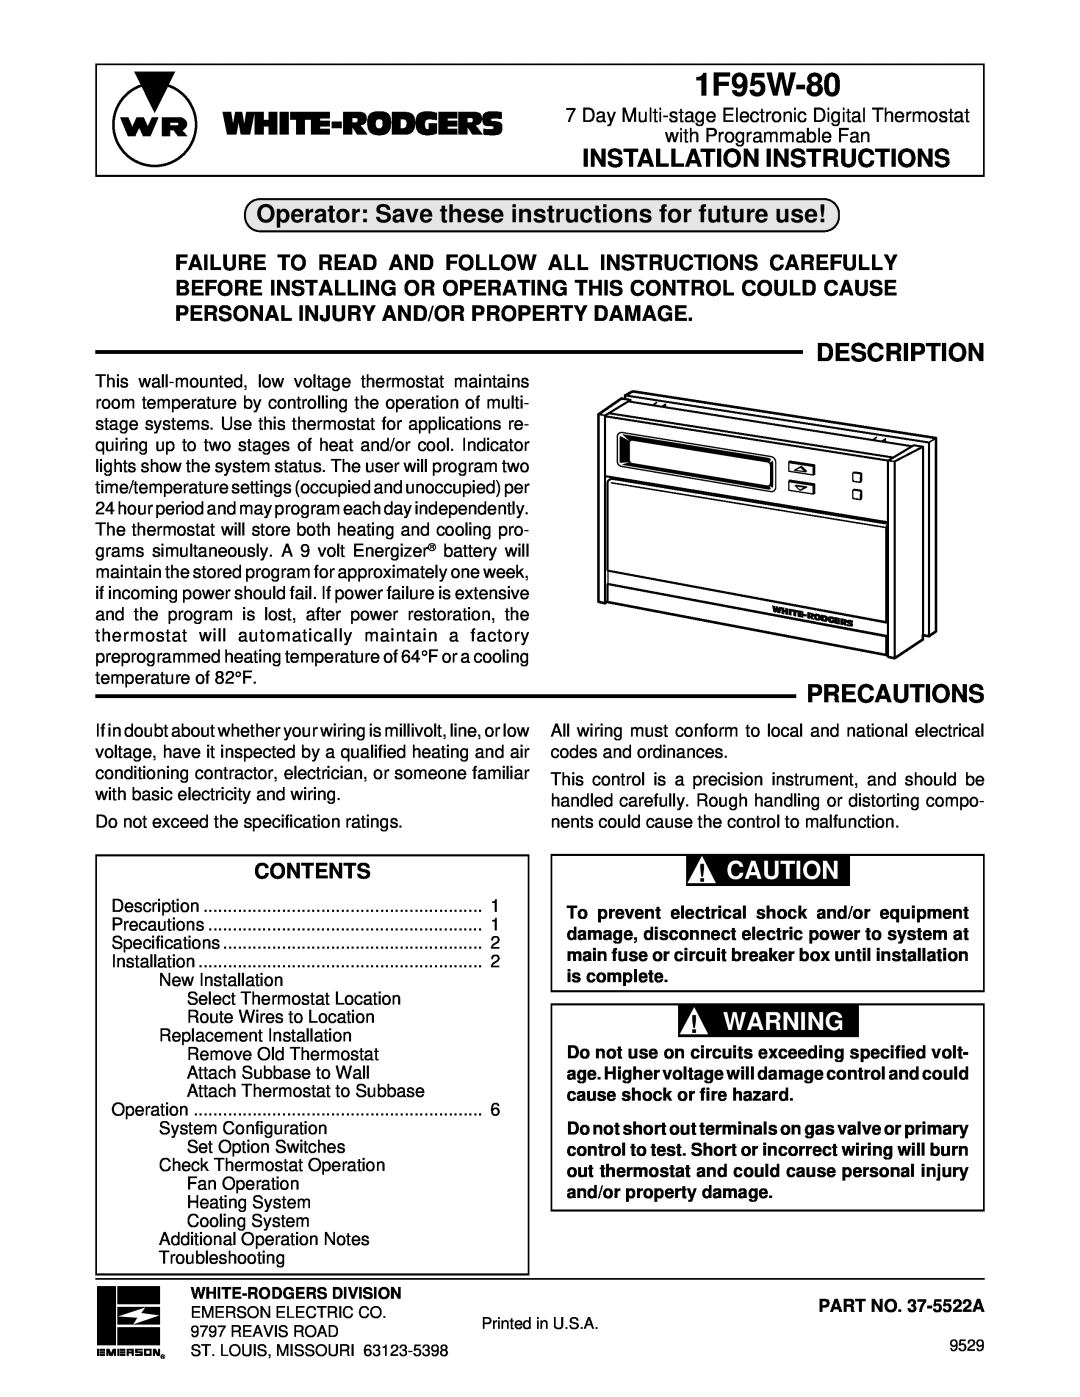 White Rodgers 1F95W-80 installation instructions Operator Save these instructions for future use, Description, Precautions 